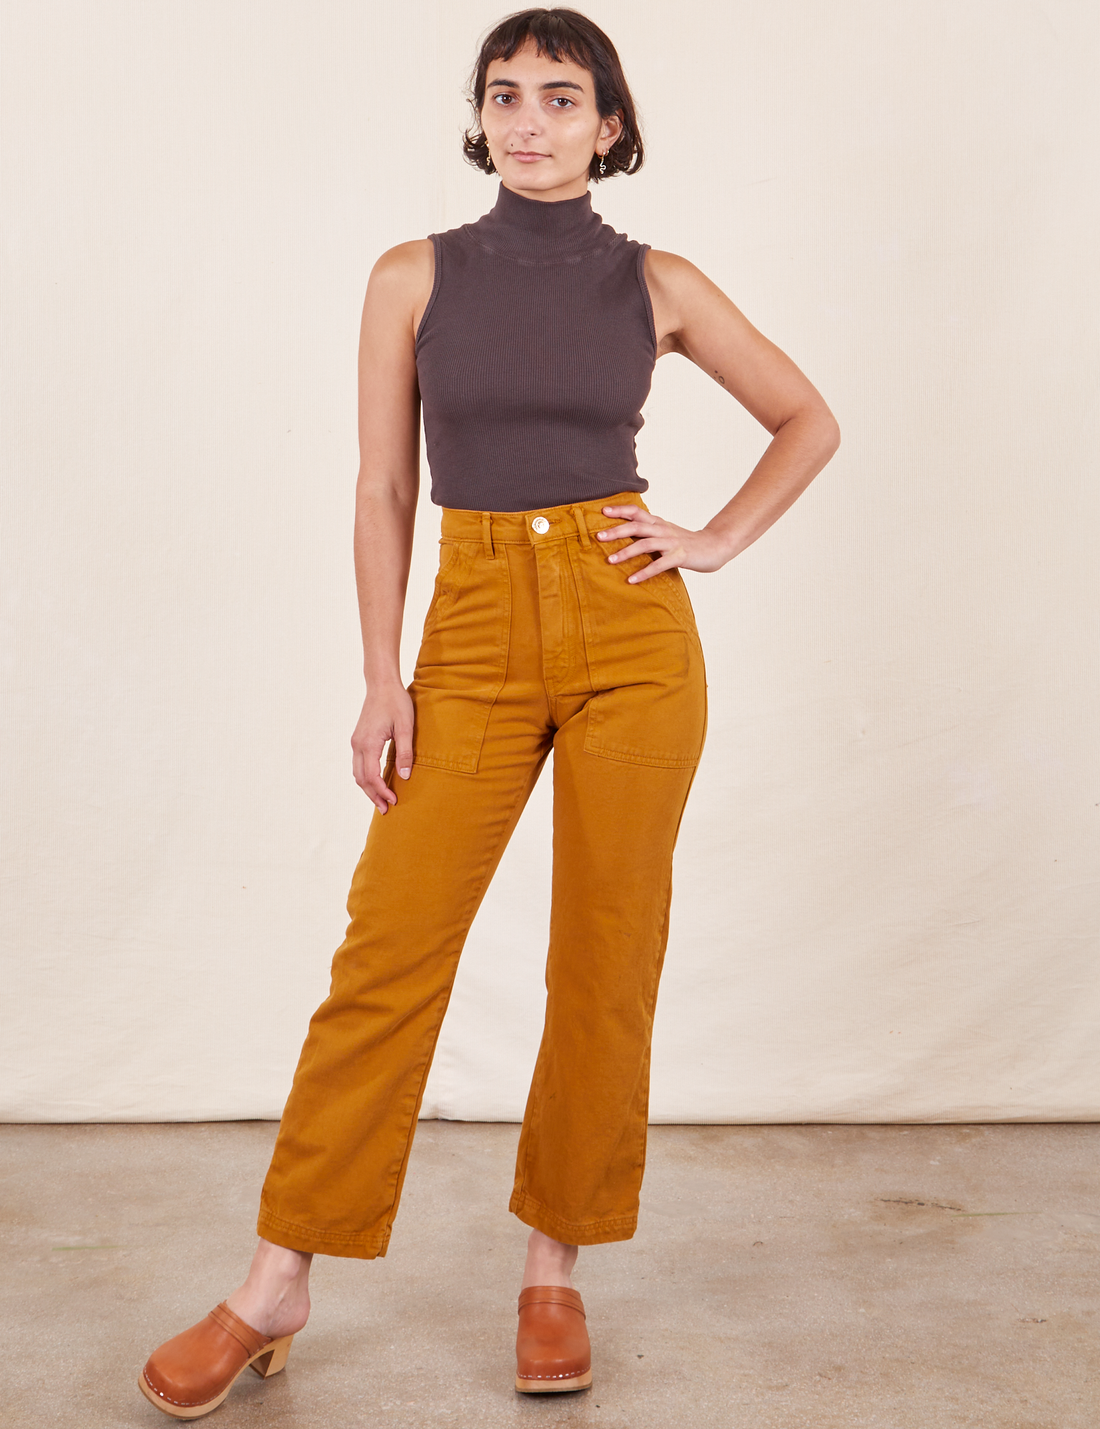 Soraya is 5'2" and wearing Petite XXS Work Pants in Spicy Mustard paired with an espresso brown Sleeveless Turtleneck